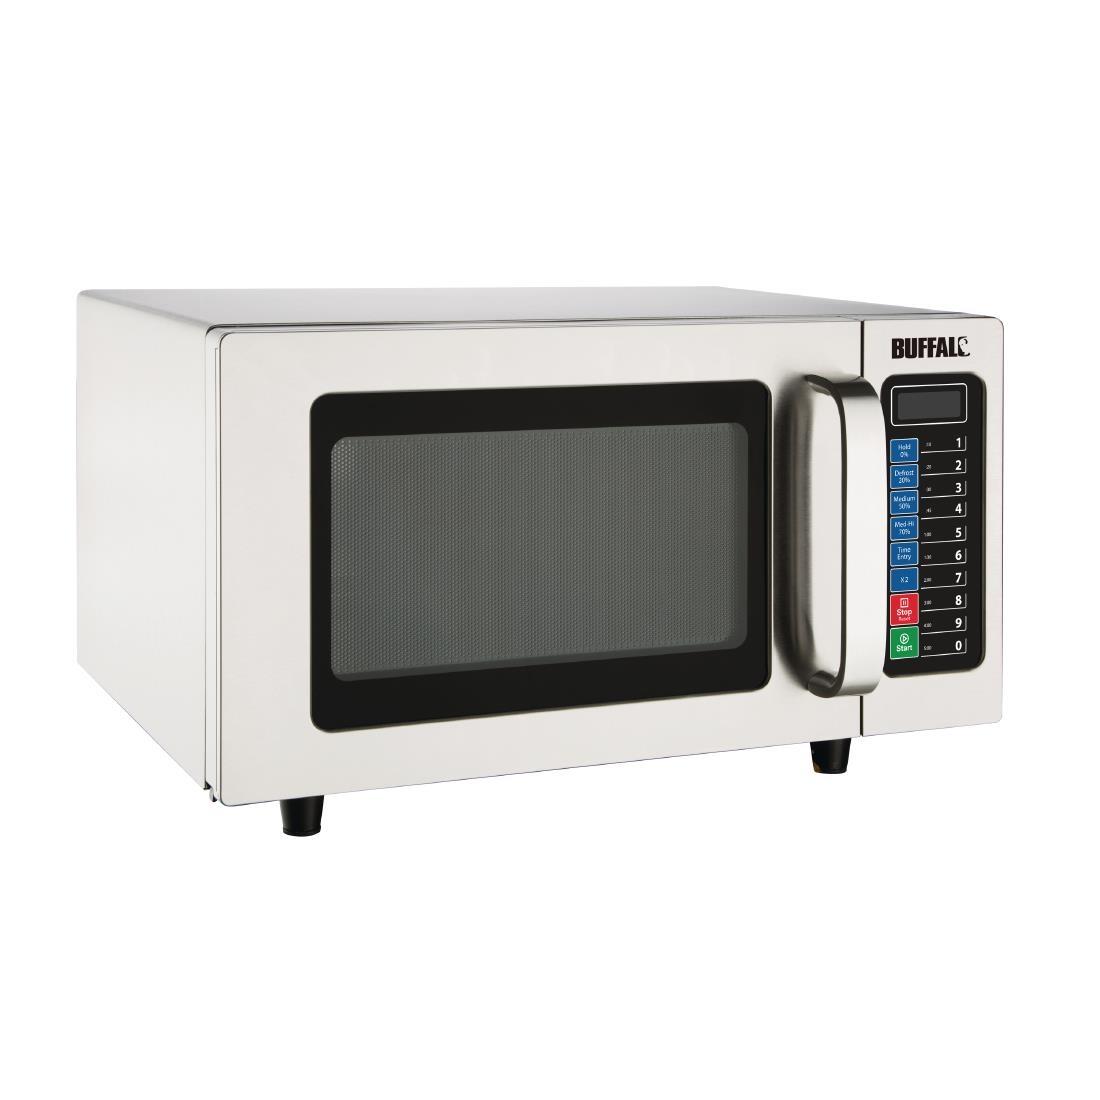 Buffalo Programmable Commercial Microwave 25ltr 1000W - FB862  - 4